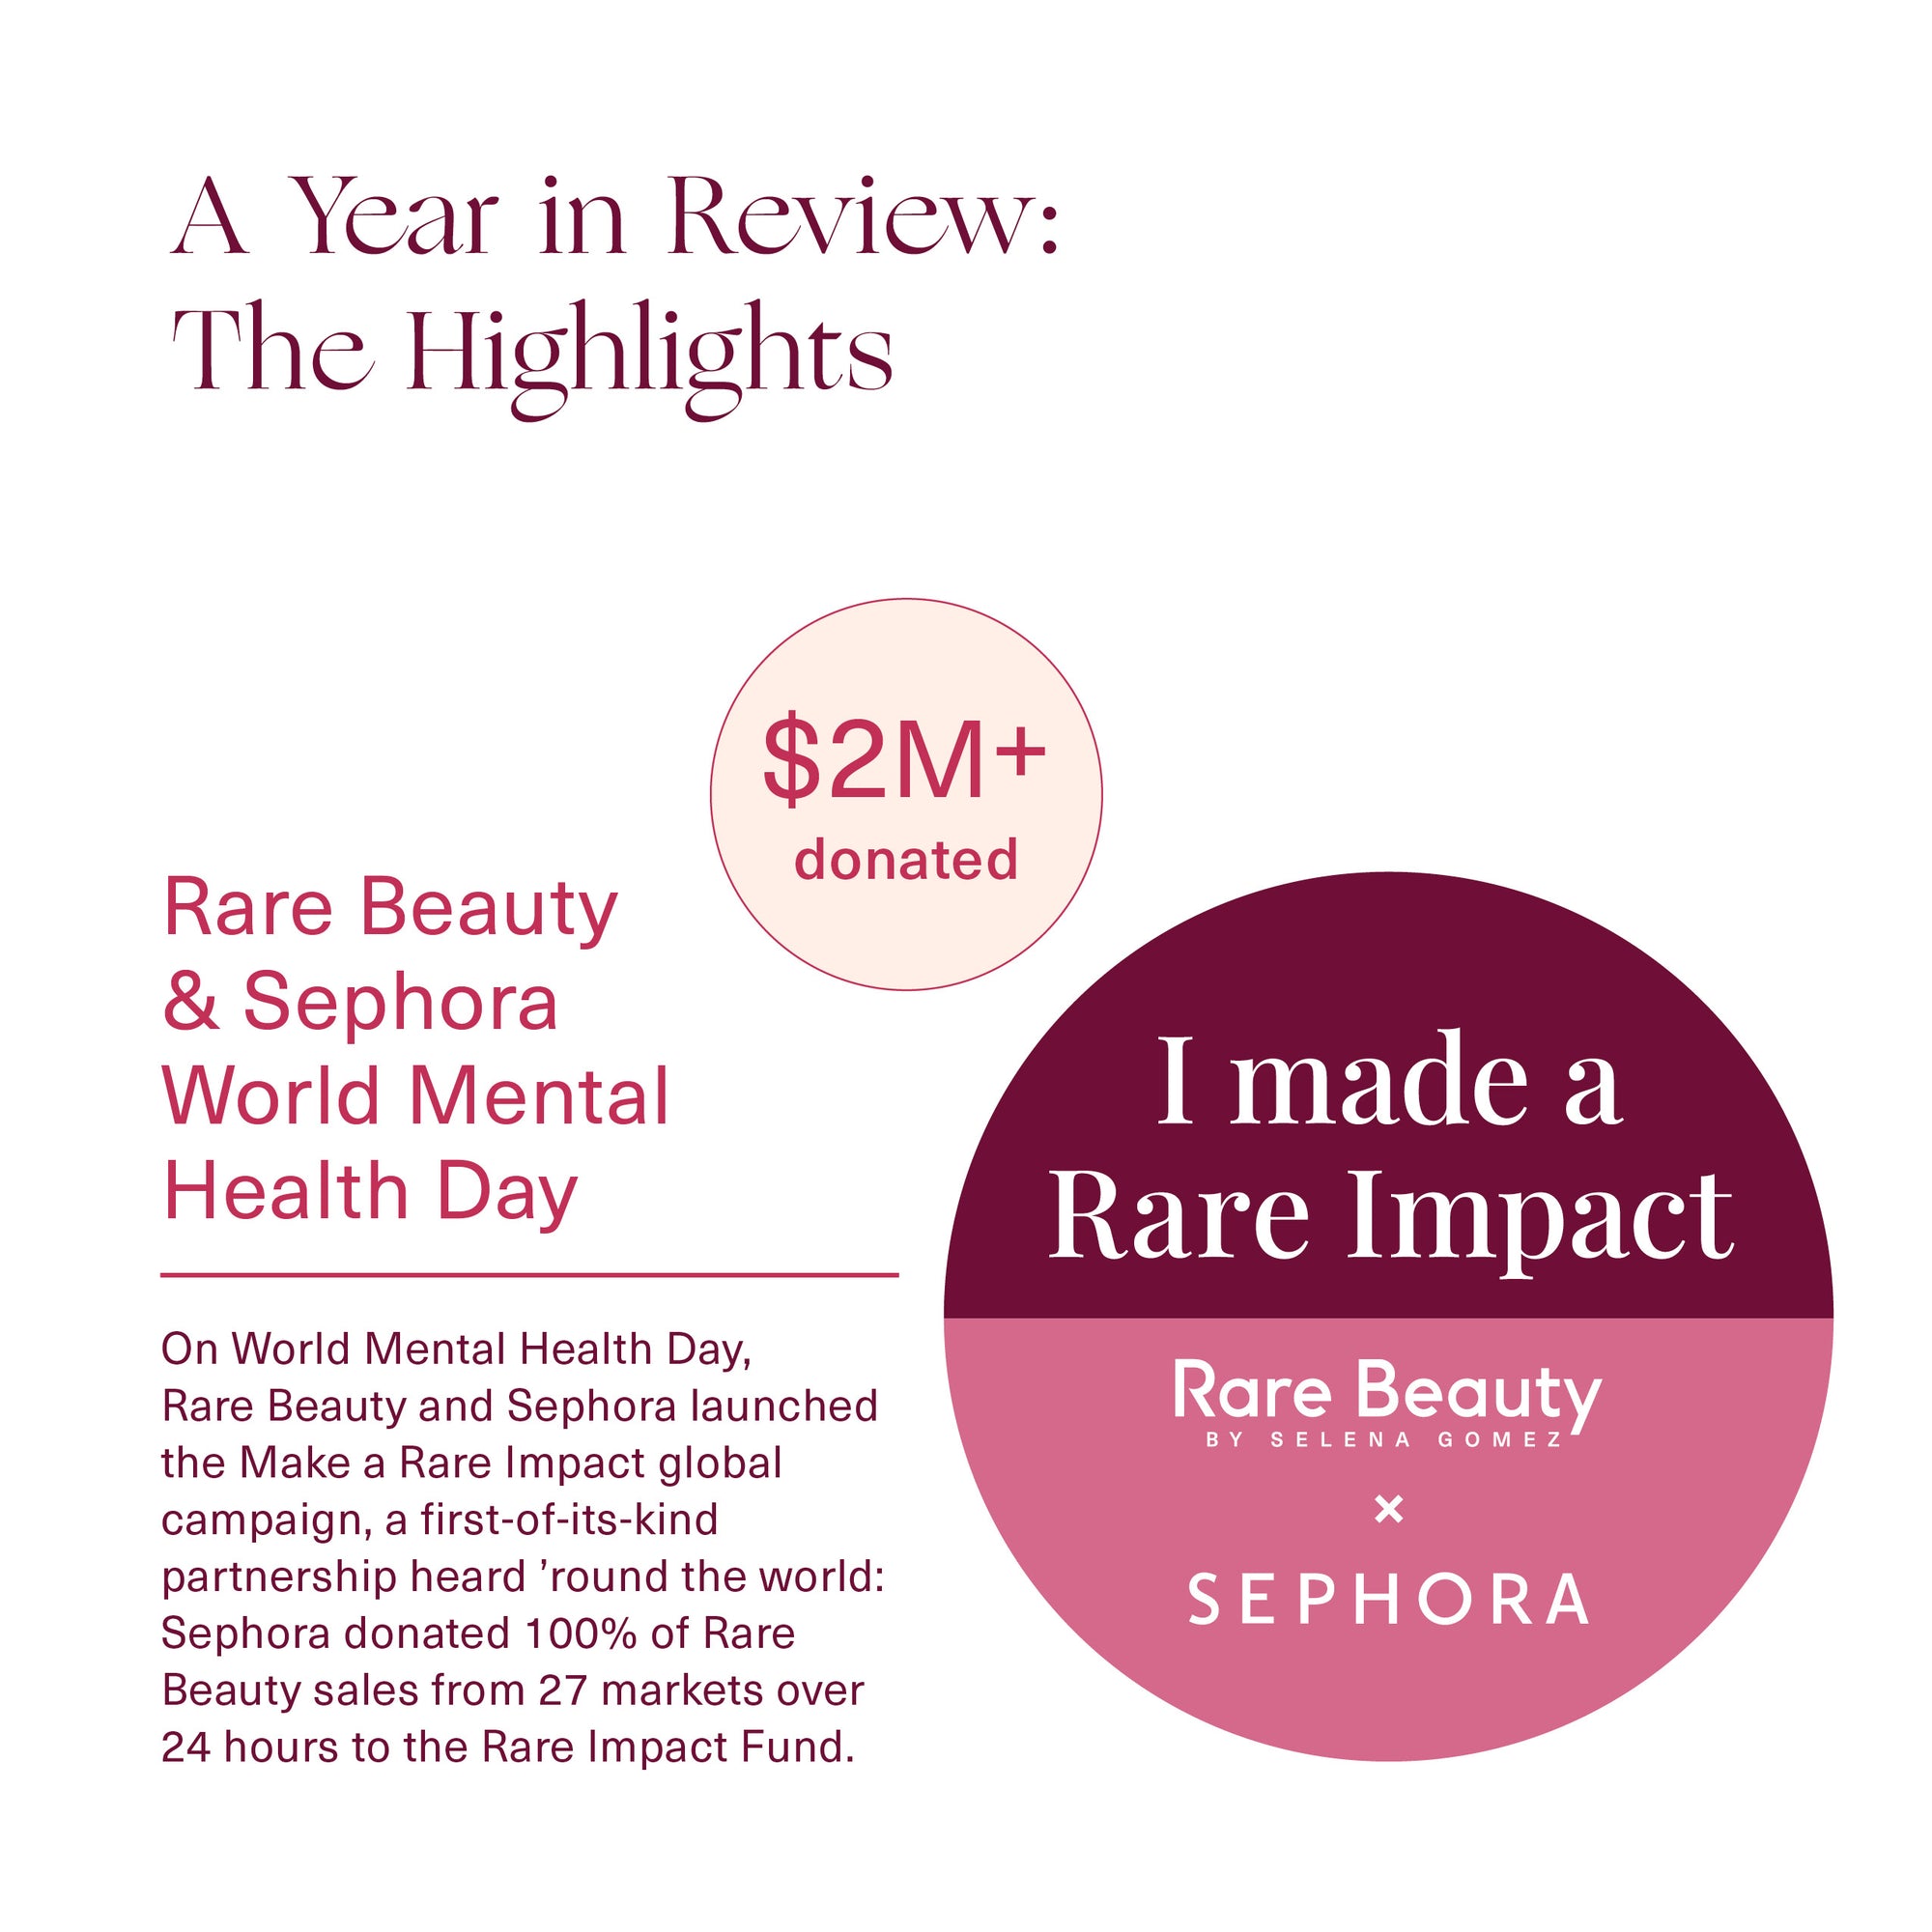 A year in reviewL Rare Beauty & Sephora World Mental Health Day 